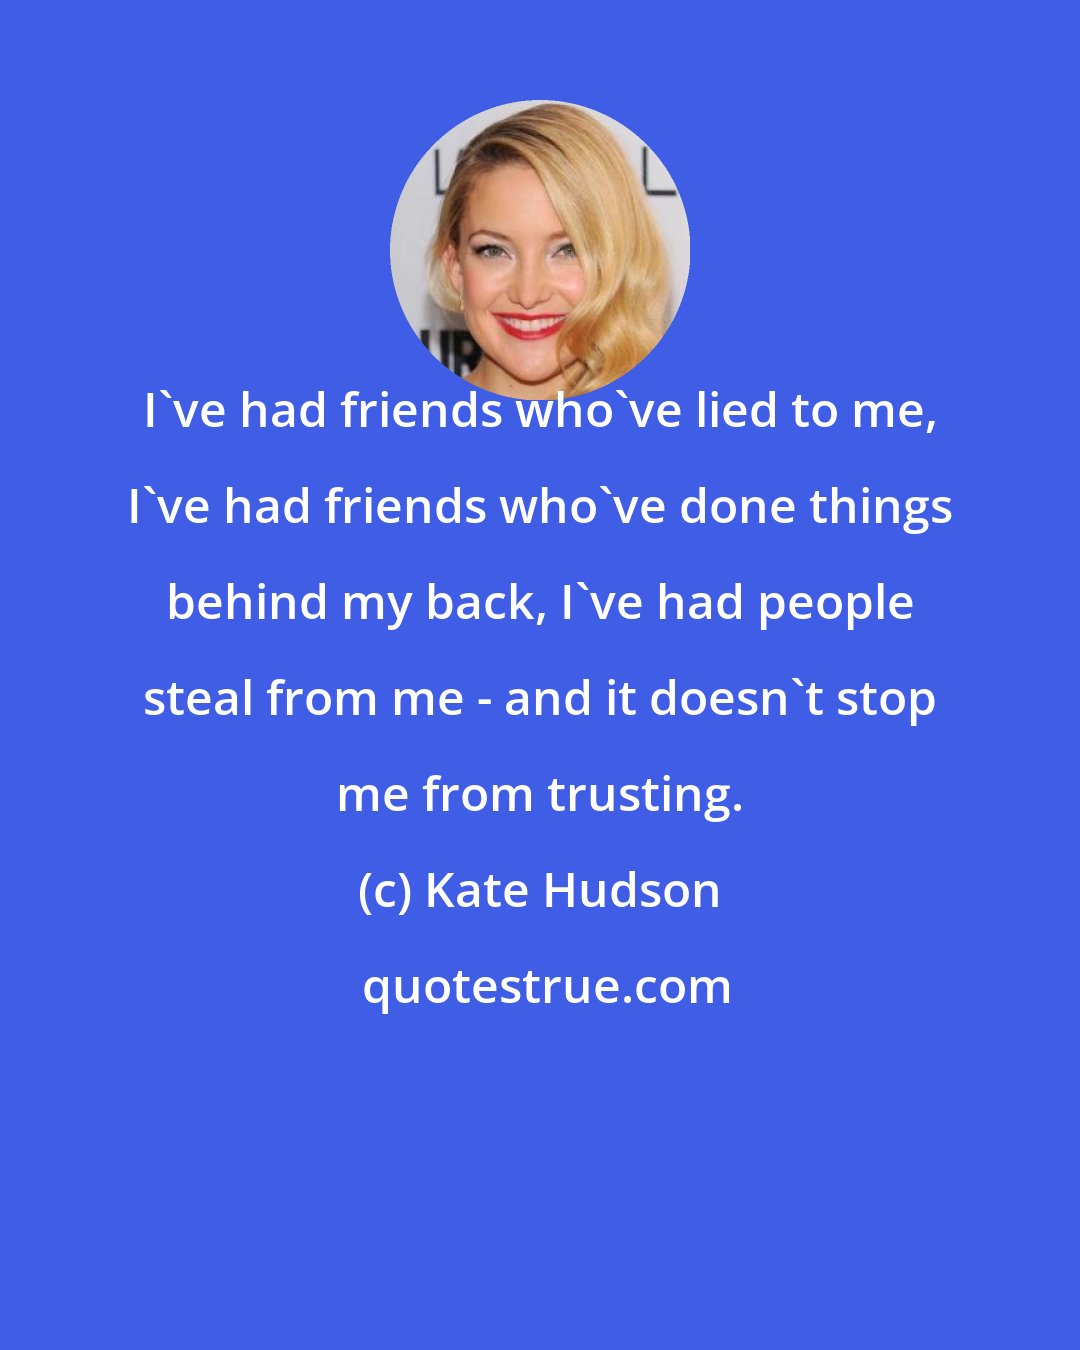 Kate Hudson: I've had friends who've lied to me, I've had friends who've done things behind my back, I've had people steal from me - and it doesn't stop me from trusting.